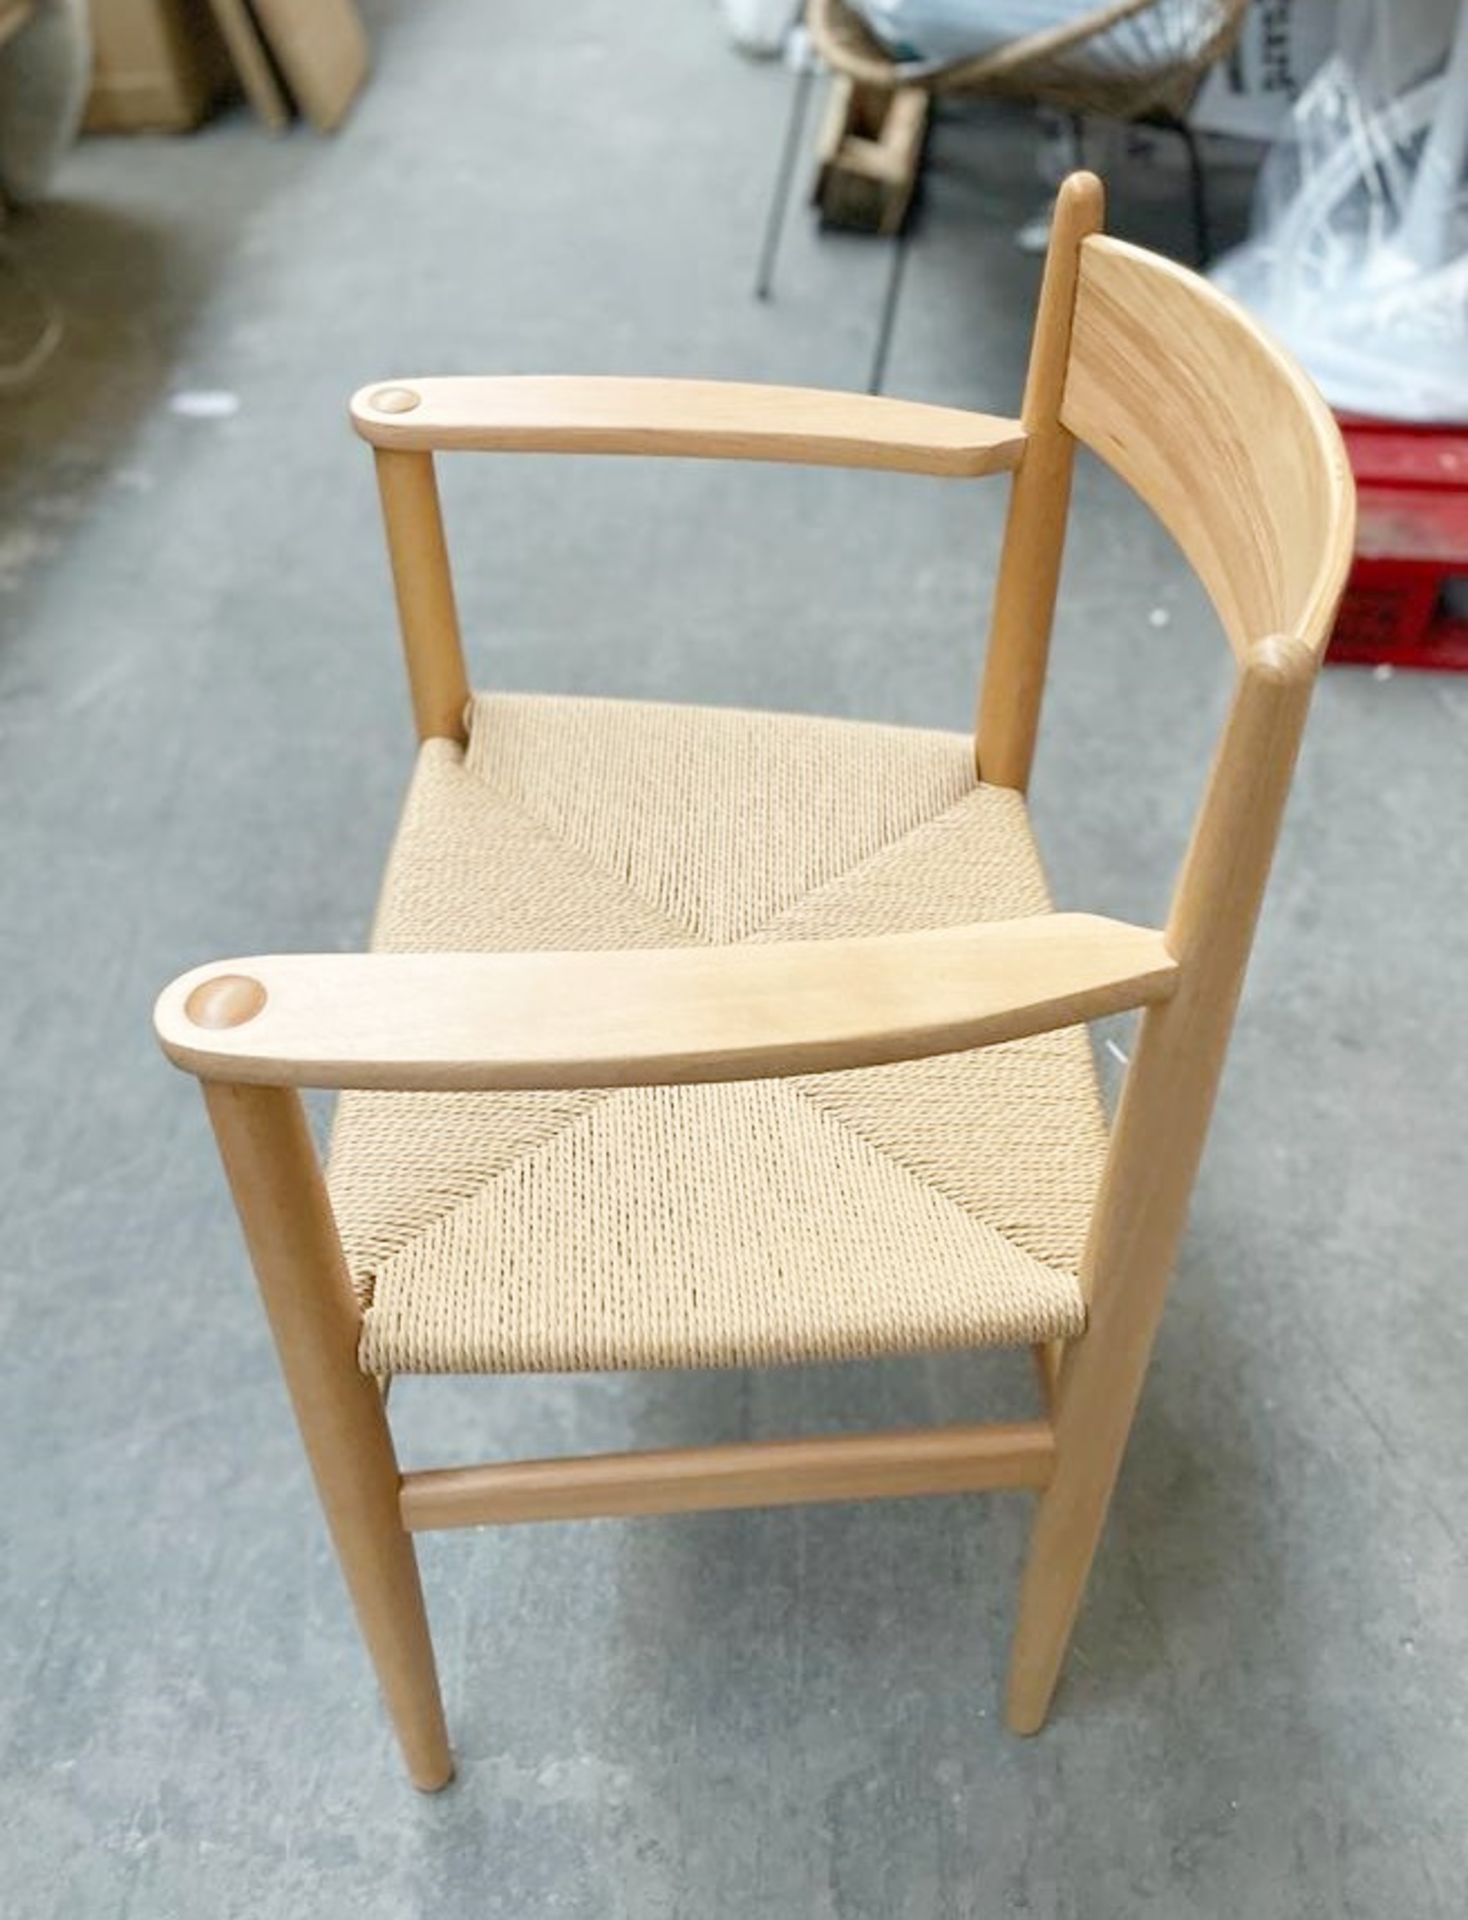 1 x Natural + Natural Cord Chair With Arm Rests - Dimensions: 50(h) x 48(d) x 58(w) cm - Brand New - Image 4 of 6